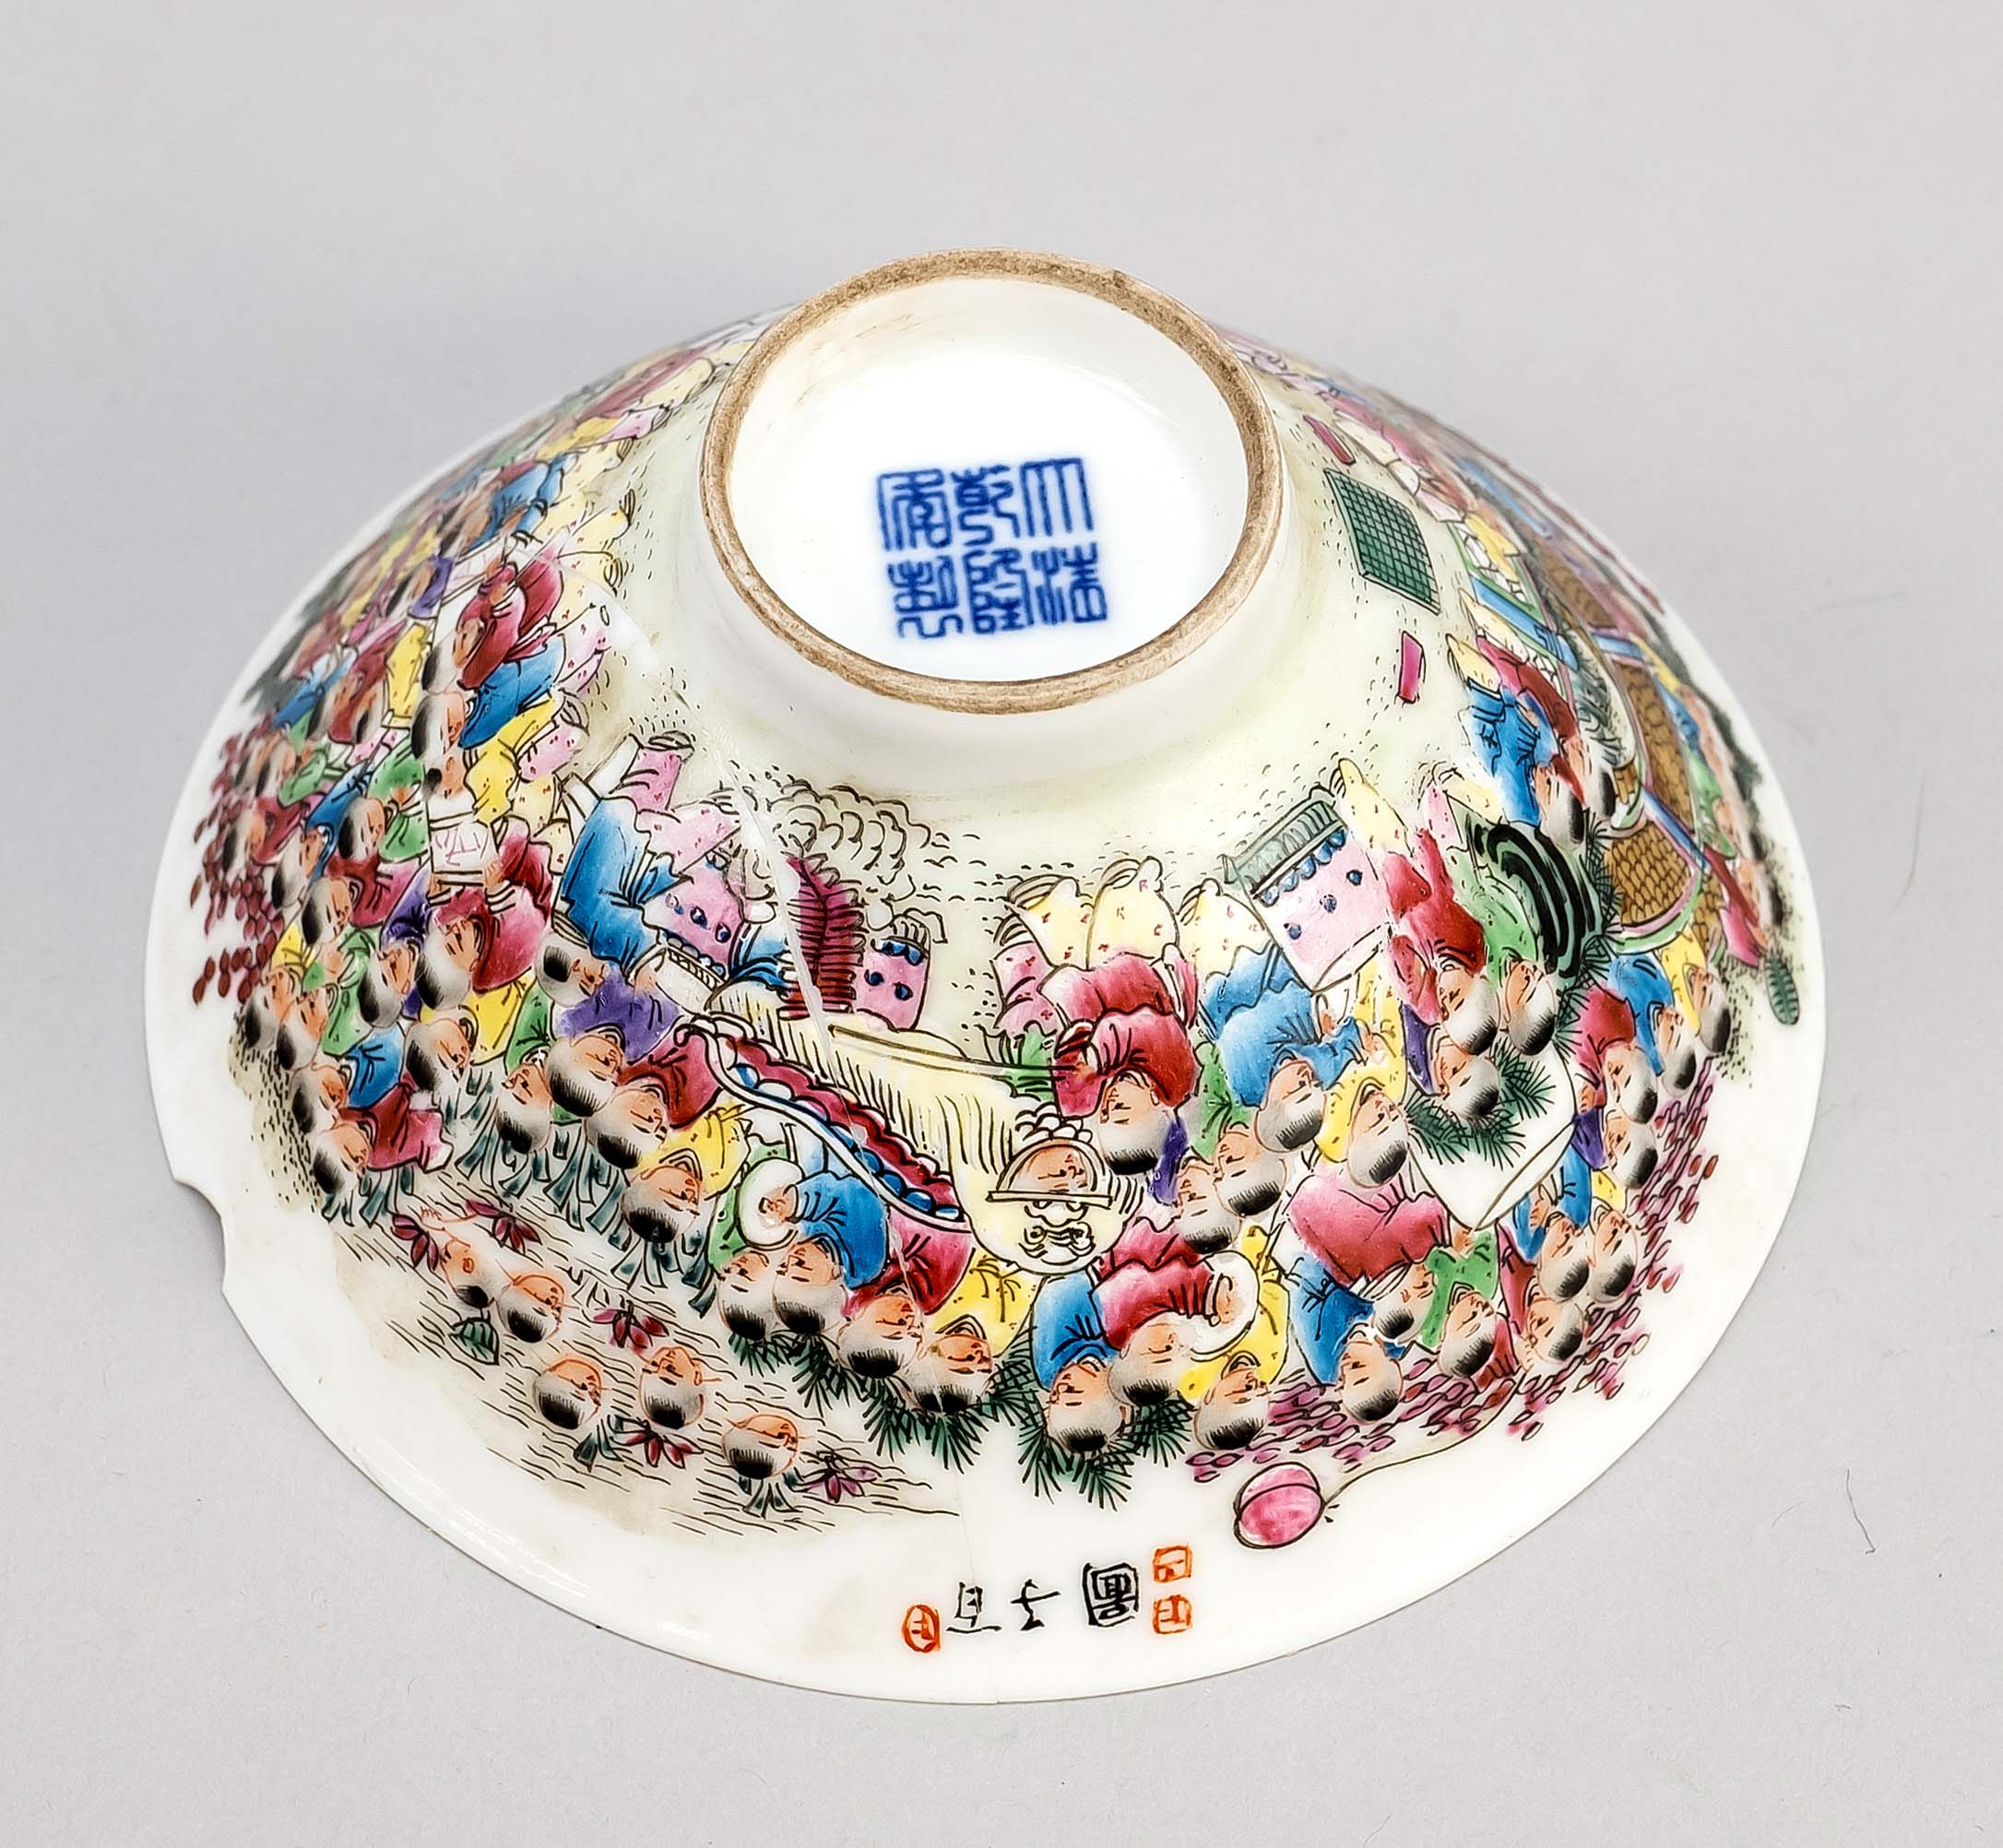 Conical tea bowl 100 children, China, probably Qing Guangxu period(1875-1908), porcelain - Image 2 of 3